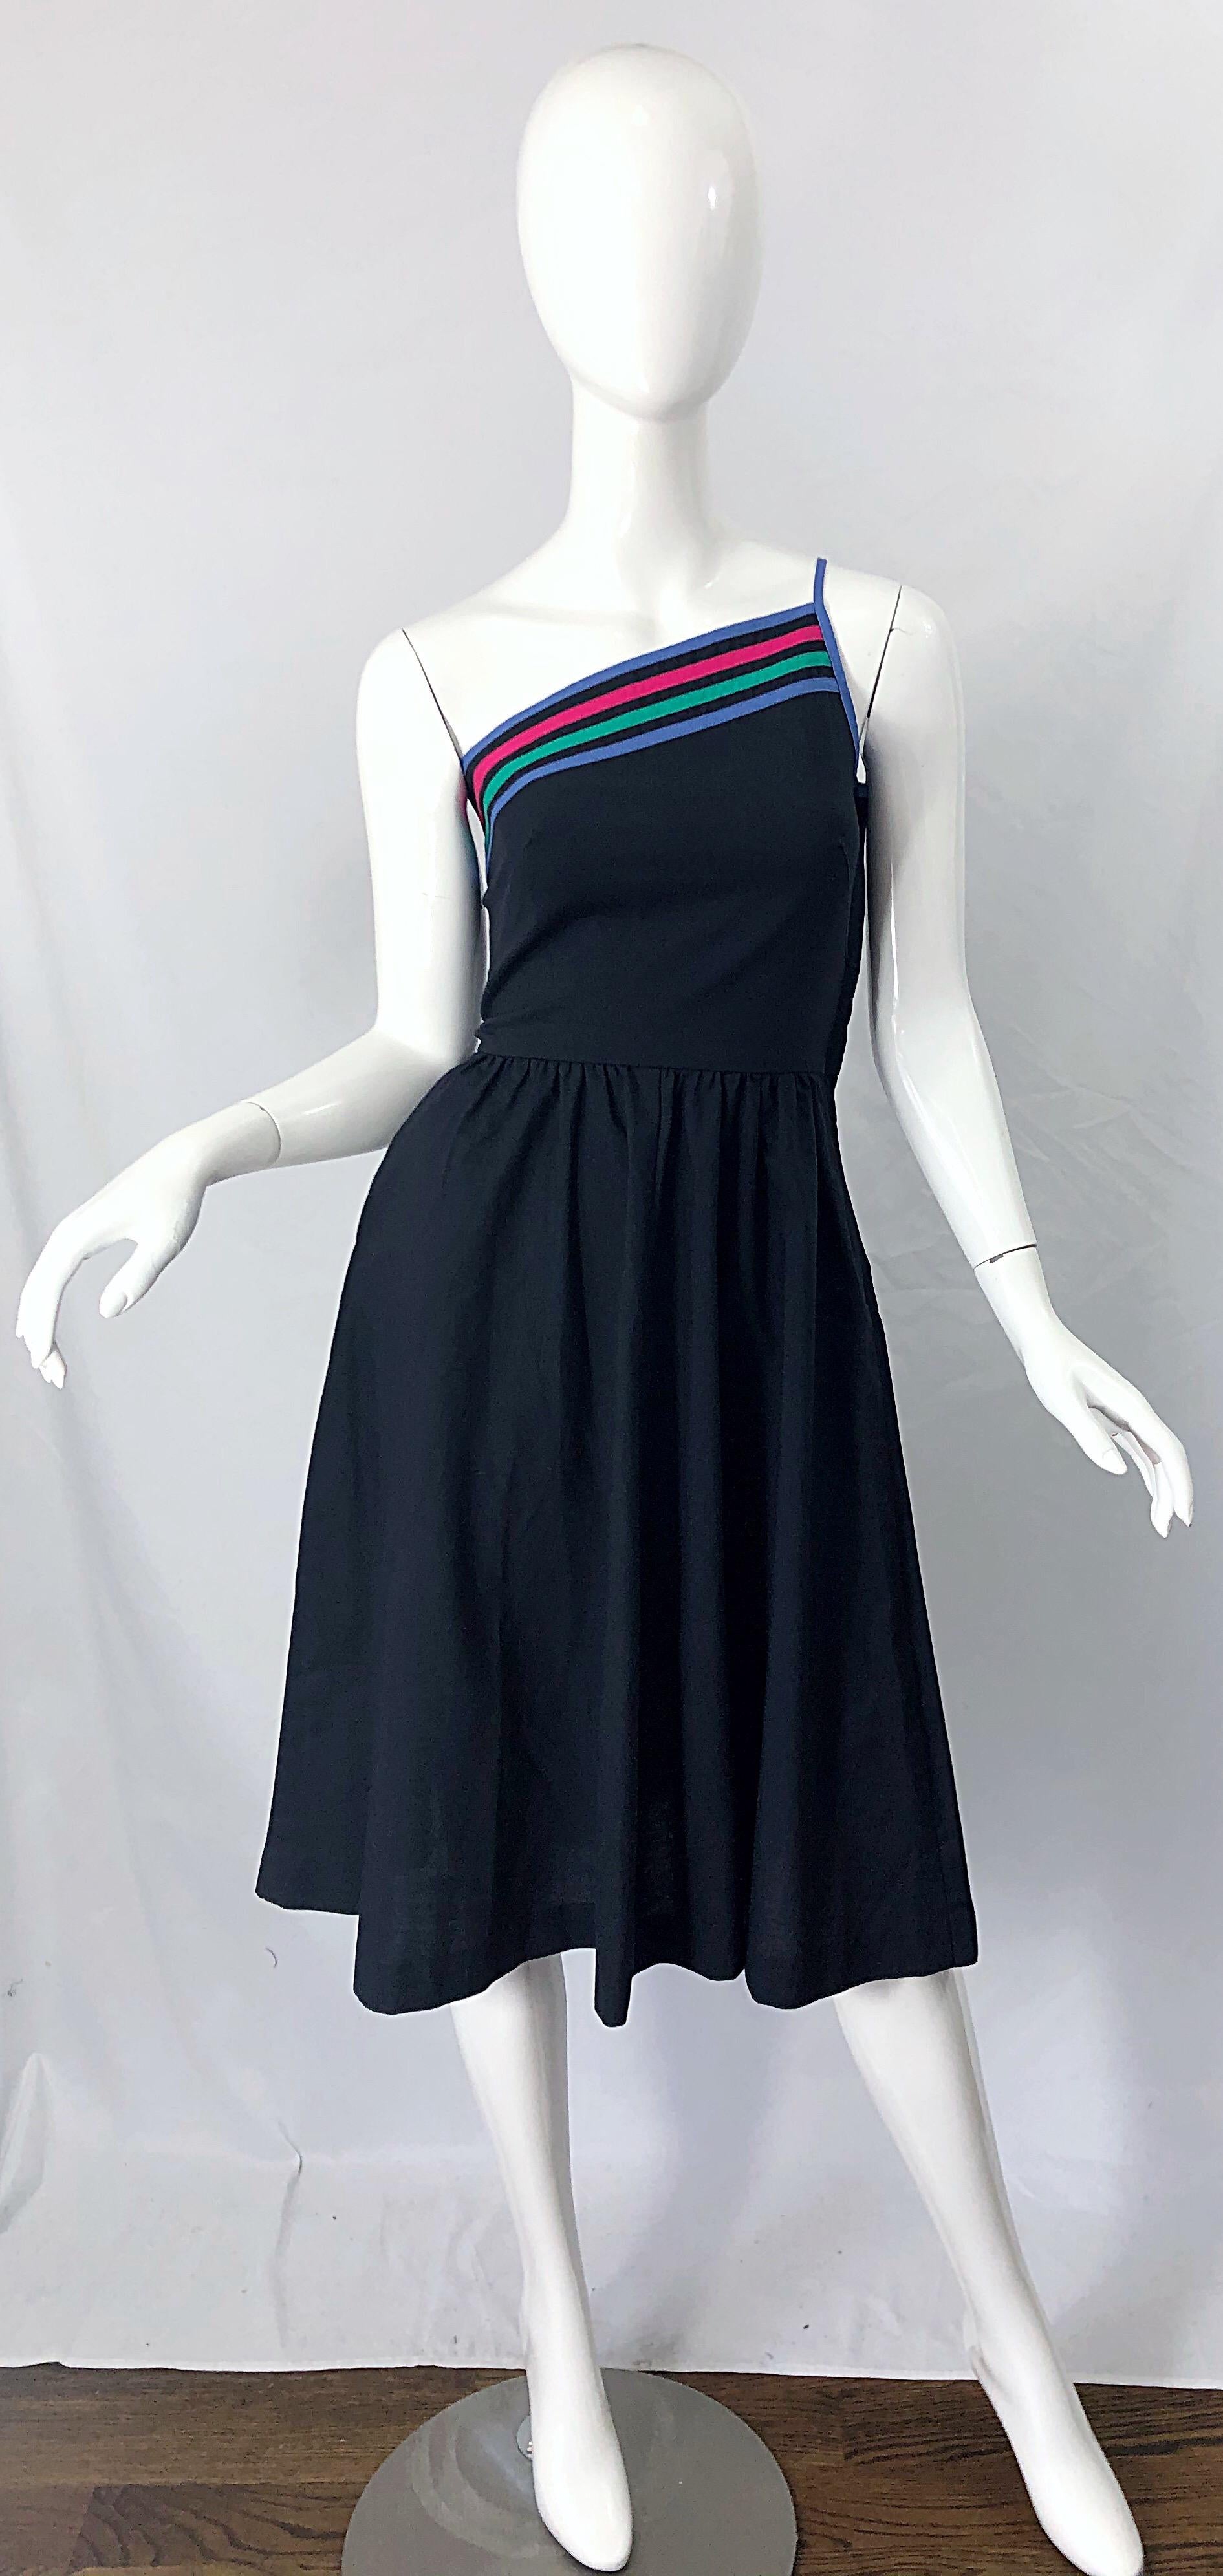 Chic vintage 80s does 50s black one shoulder fit n' flare cotton dress ! Features a tailored bodice with raspberry pink, green and periwinkle blue stripes on the top front and back. Pocket at right hip. Full skirt also allows room for a crinoline